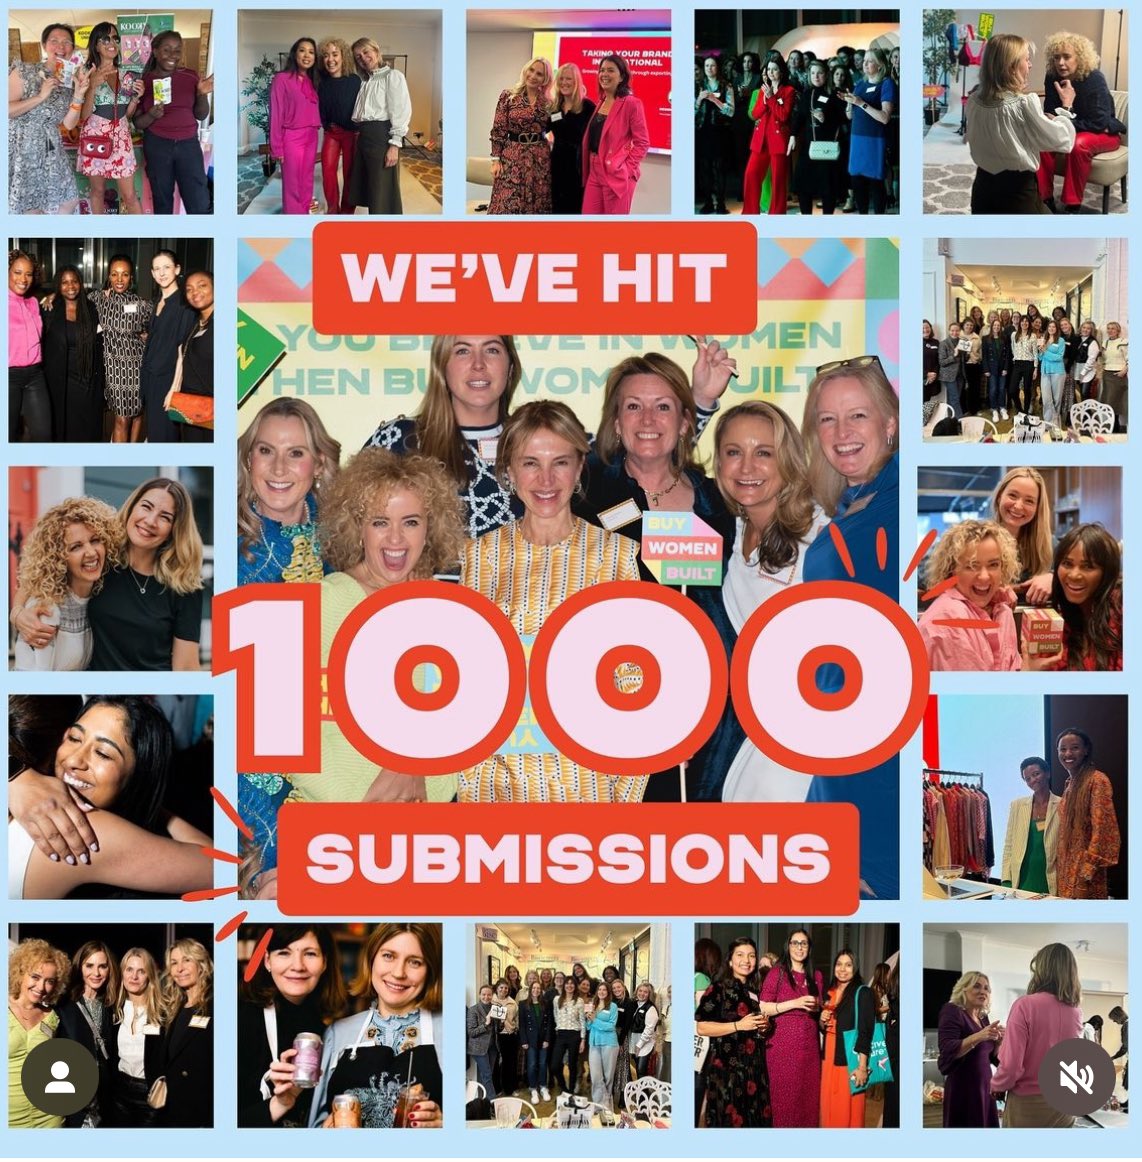 This is 1000 consumer brands started by women 1000 role models that are the antidote to toxic role models on social media 1000 inspirations 1000 ways to change the stats 1000 reasons young girls should believe they can do it This is @BuyWomenBuilt